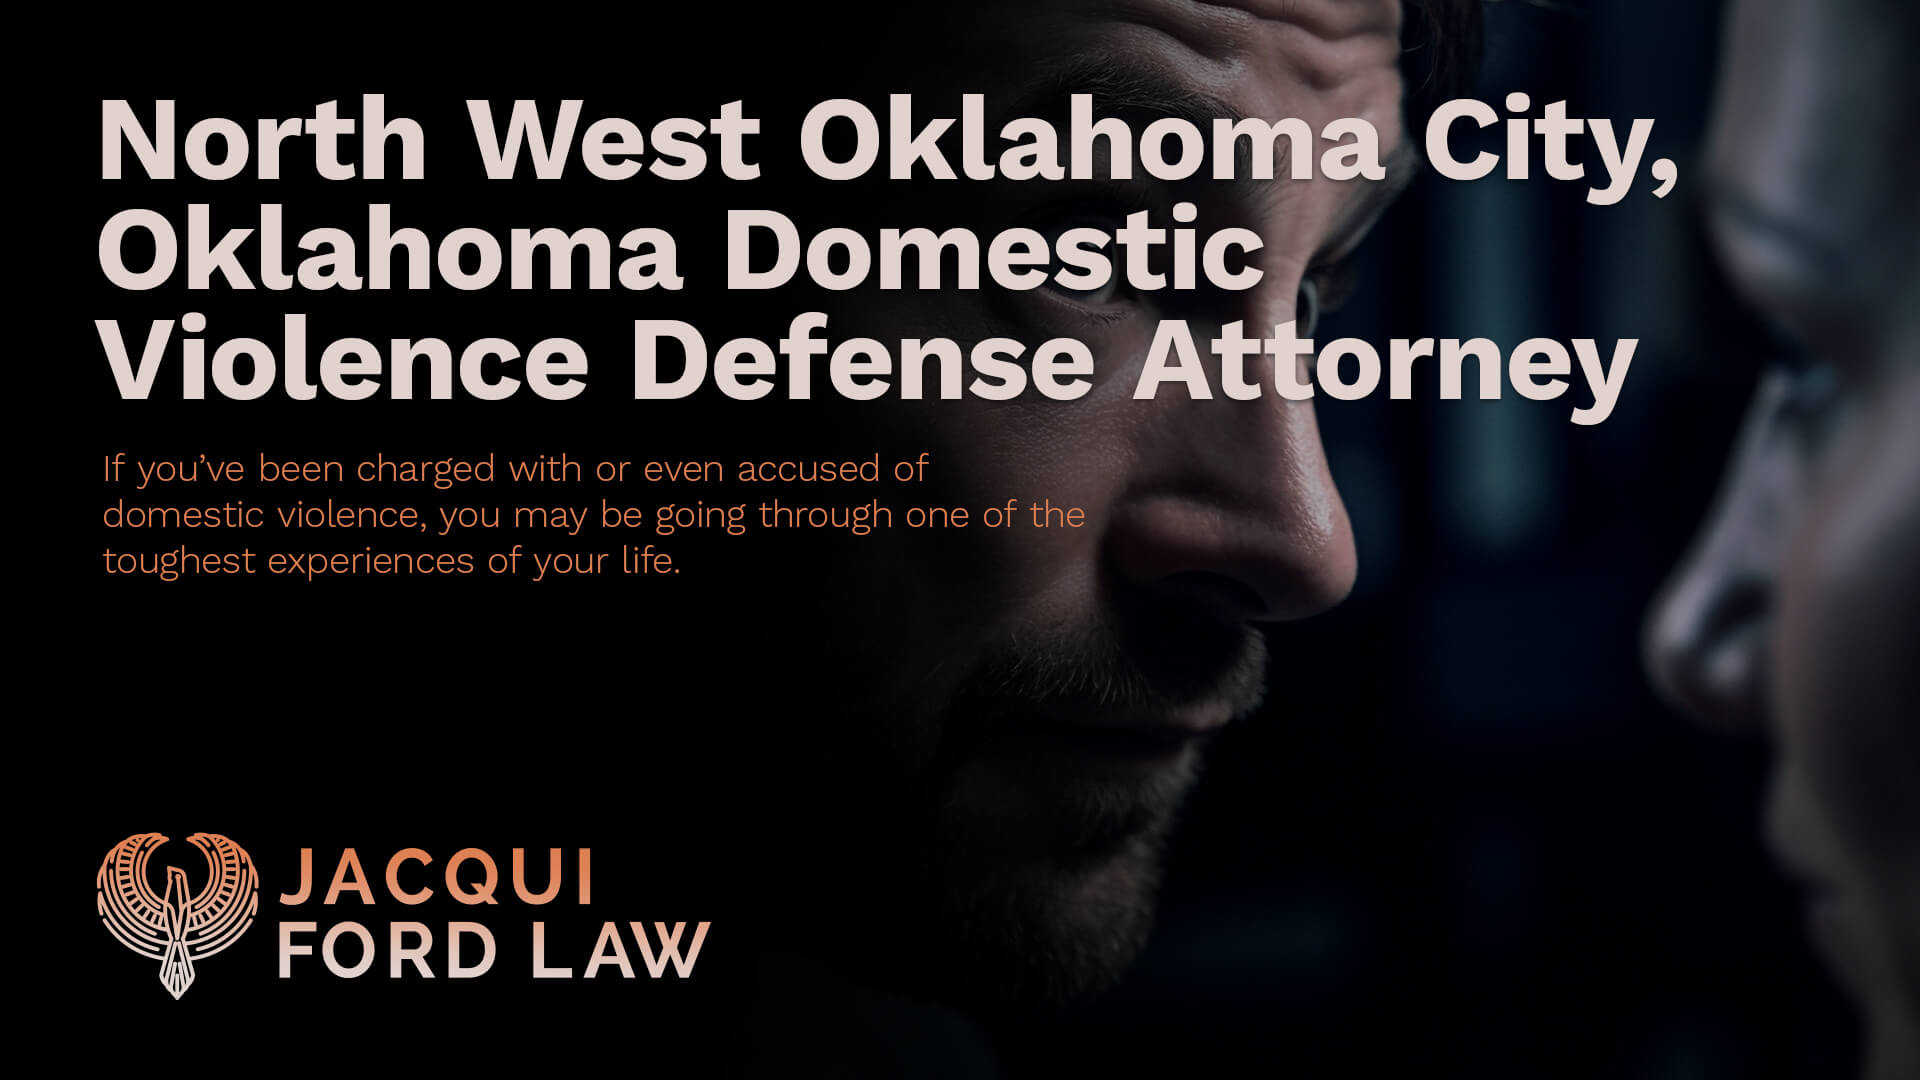 North West Oklahoma Domestic Violence Defense Attorney - jacqui ford law